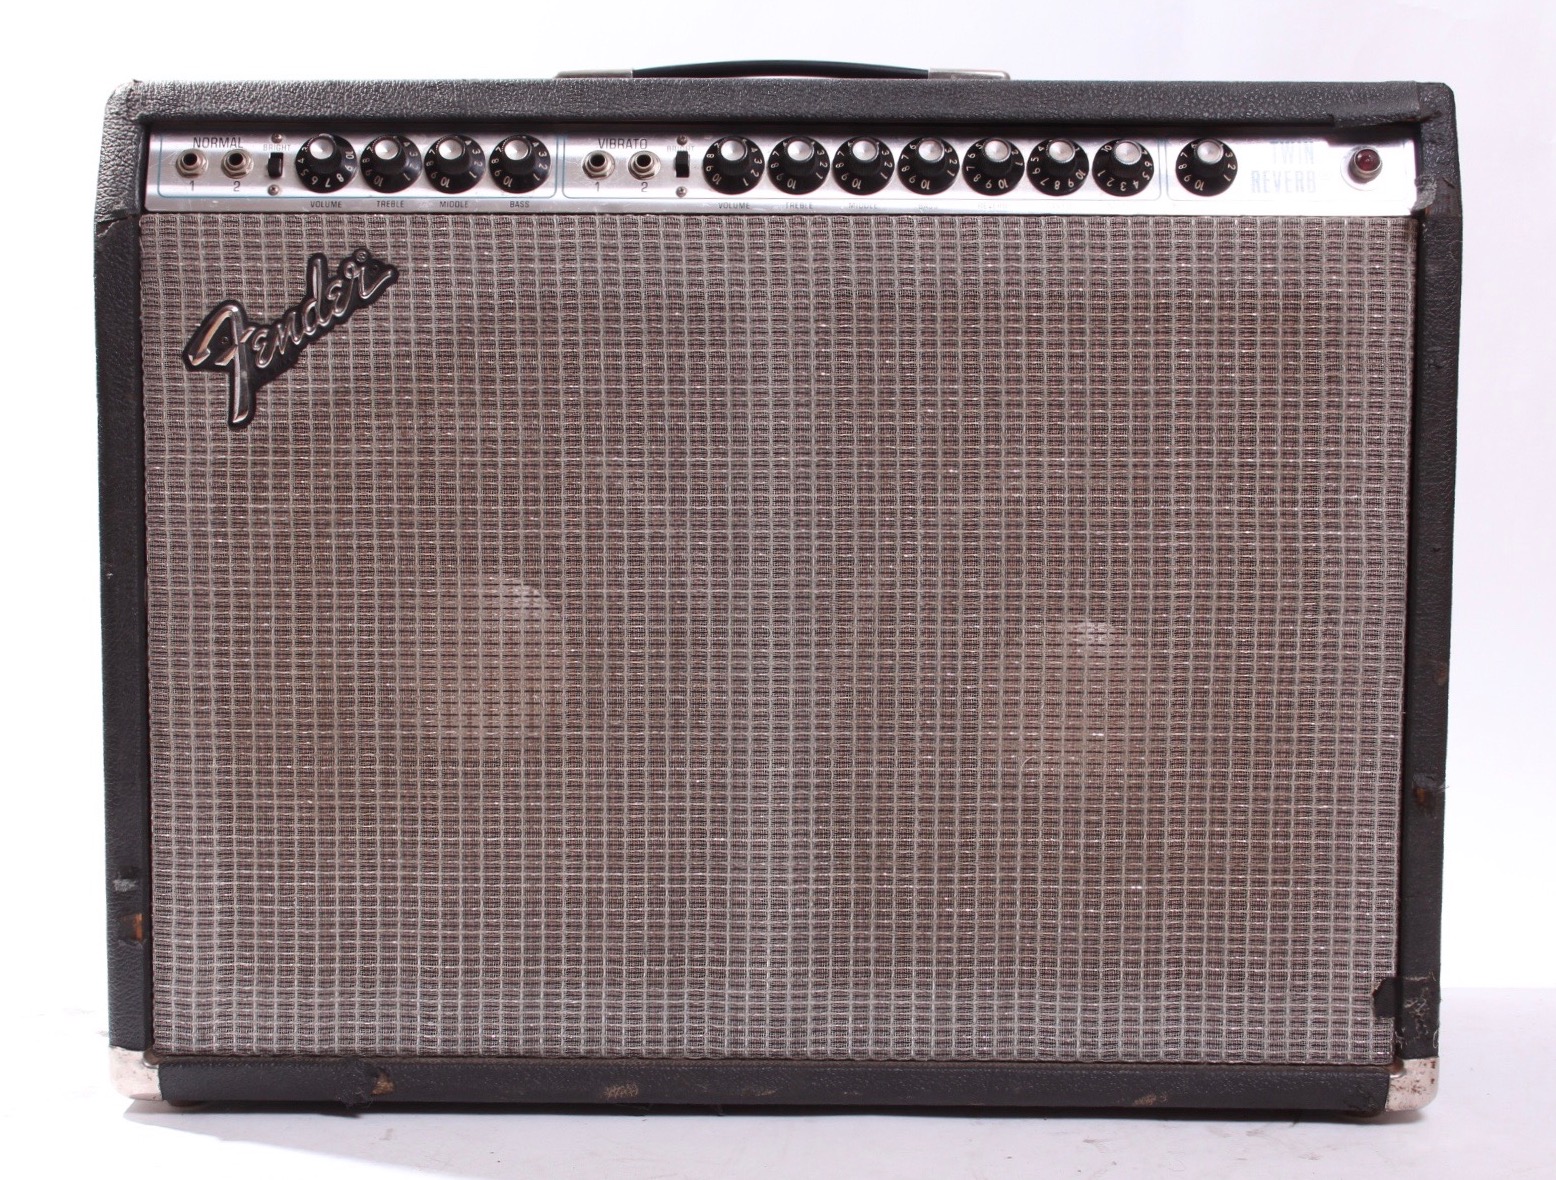 78_fender_twin_reverb_amp_silverface_location